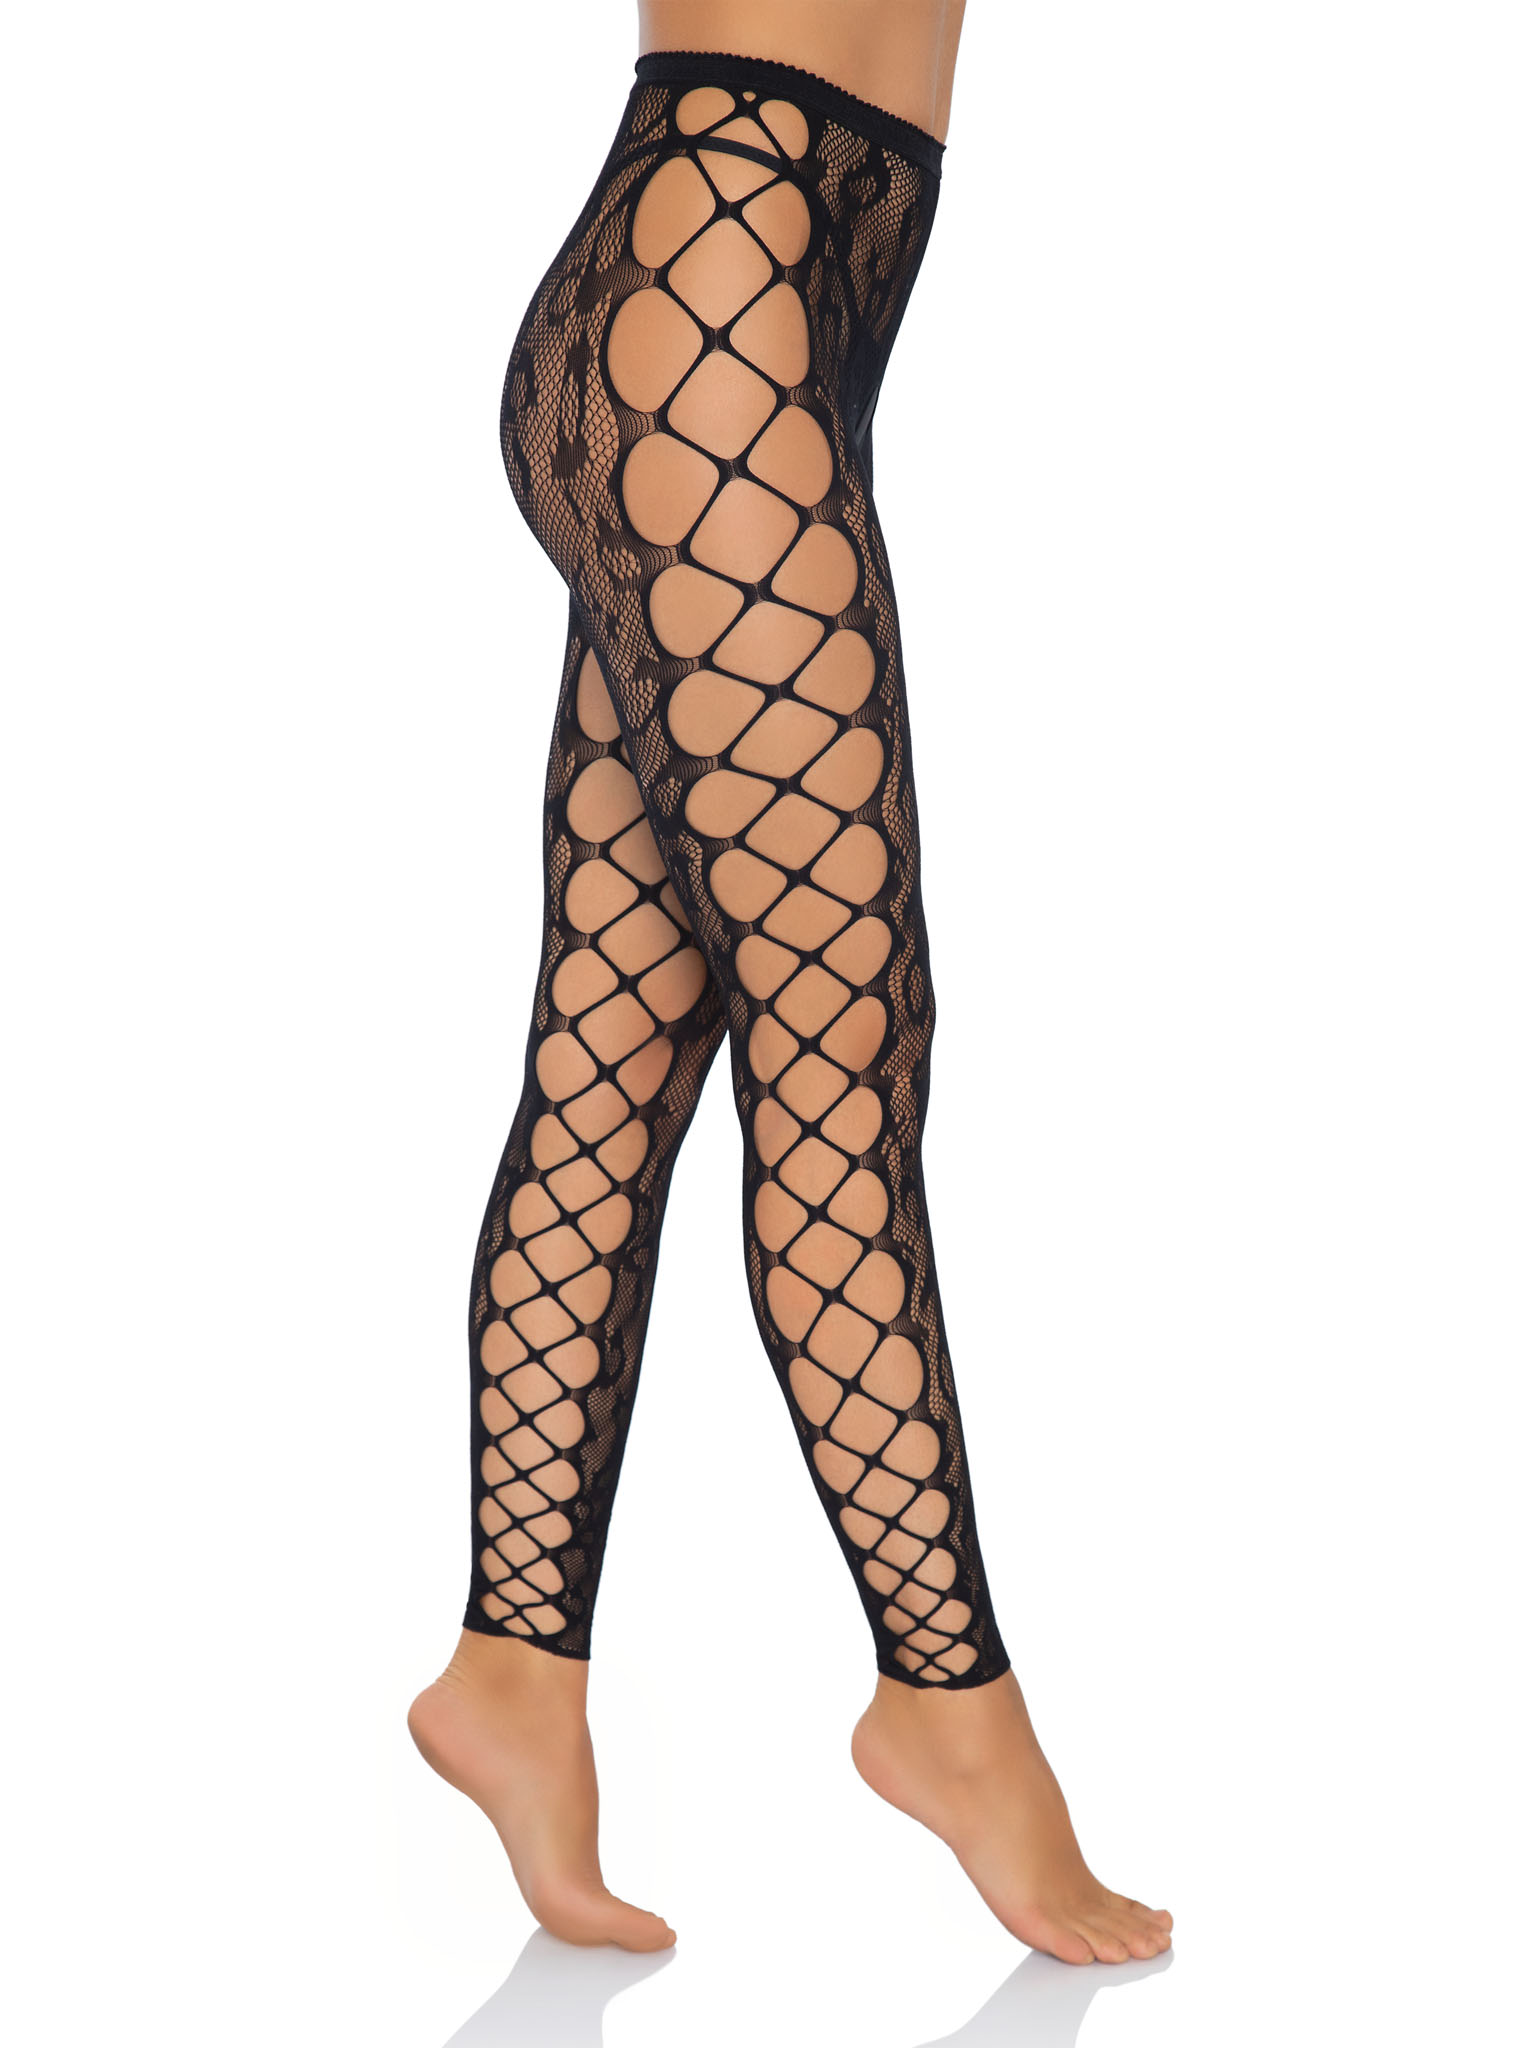 Footless Tights, Lace Footless Tights